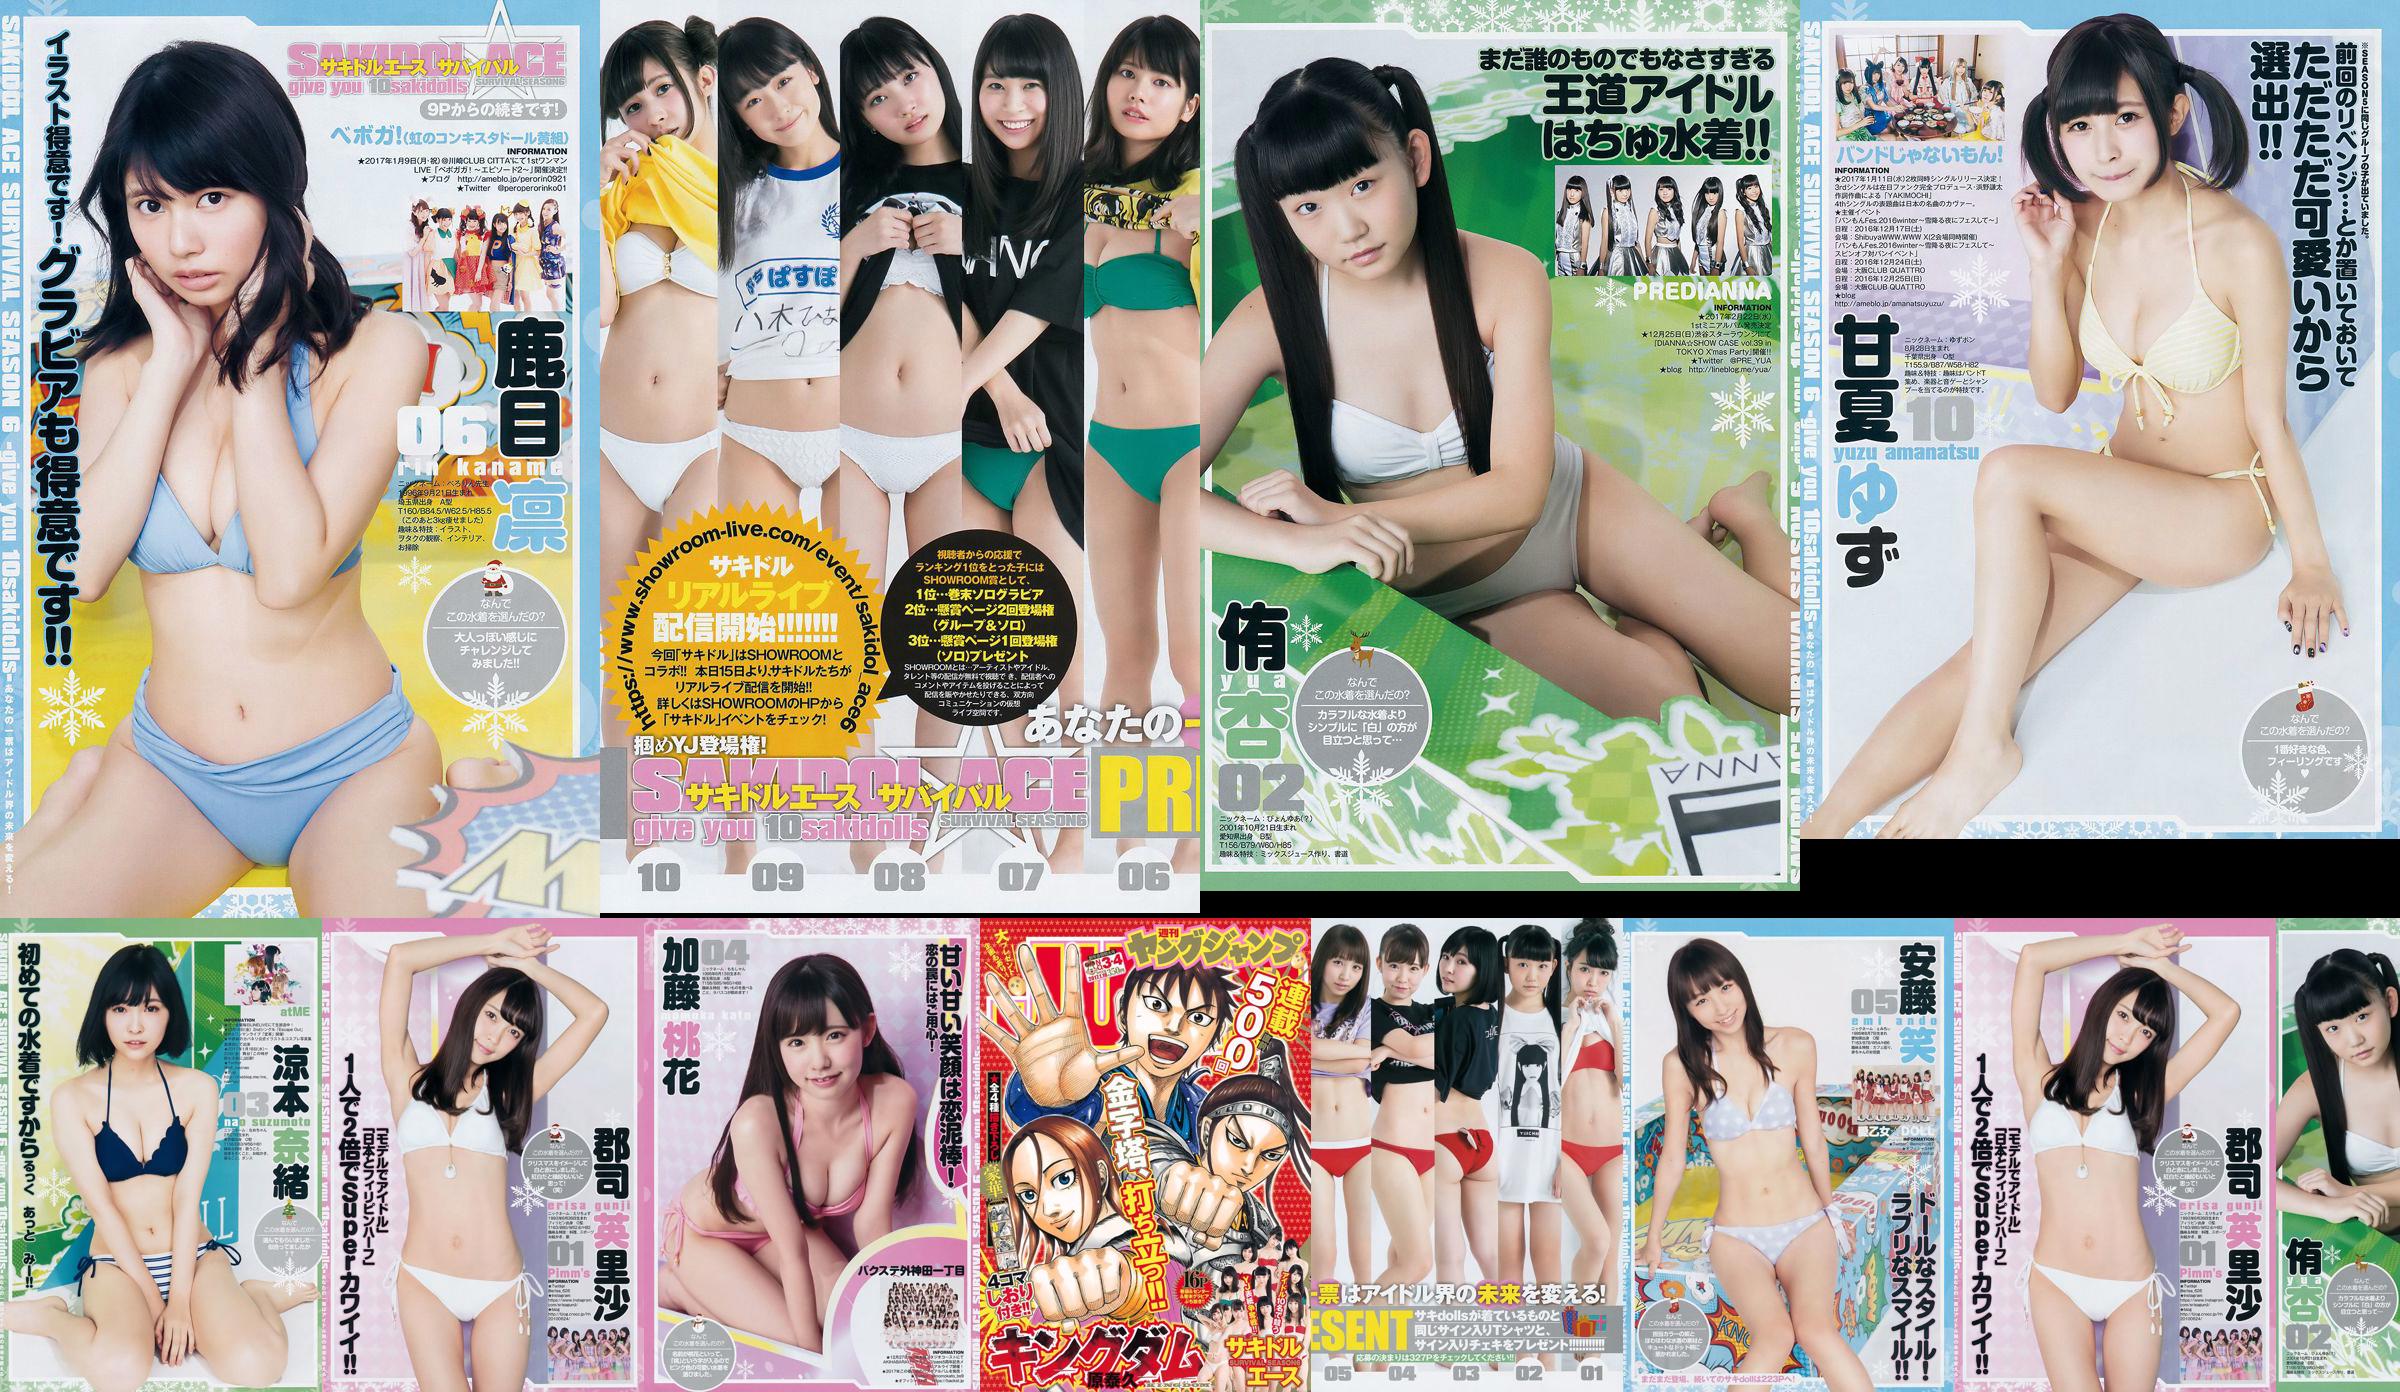 Sakidol Ace SURVIVAL SEASON6 《Give you 10sakidolls》 [Weekly Young Jump] 2017 No.03-04 Photo Magazine No.3af6c9 Page 1